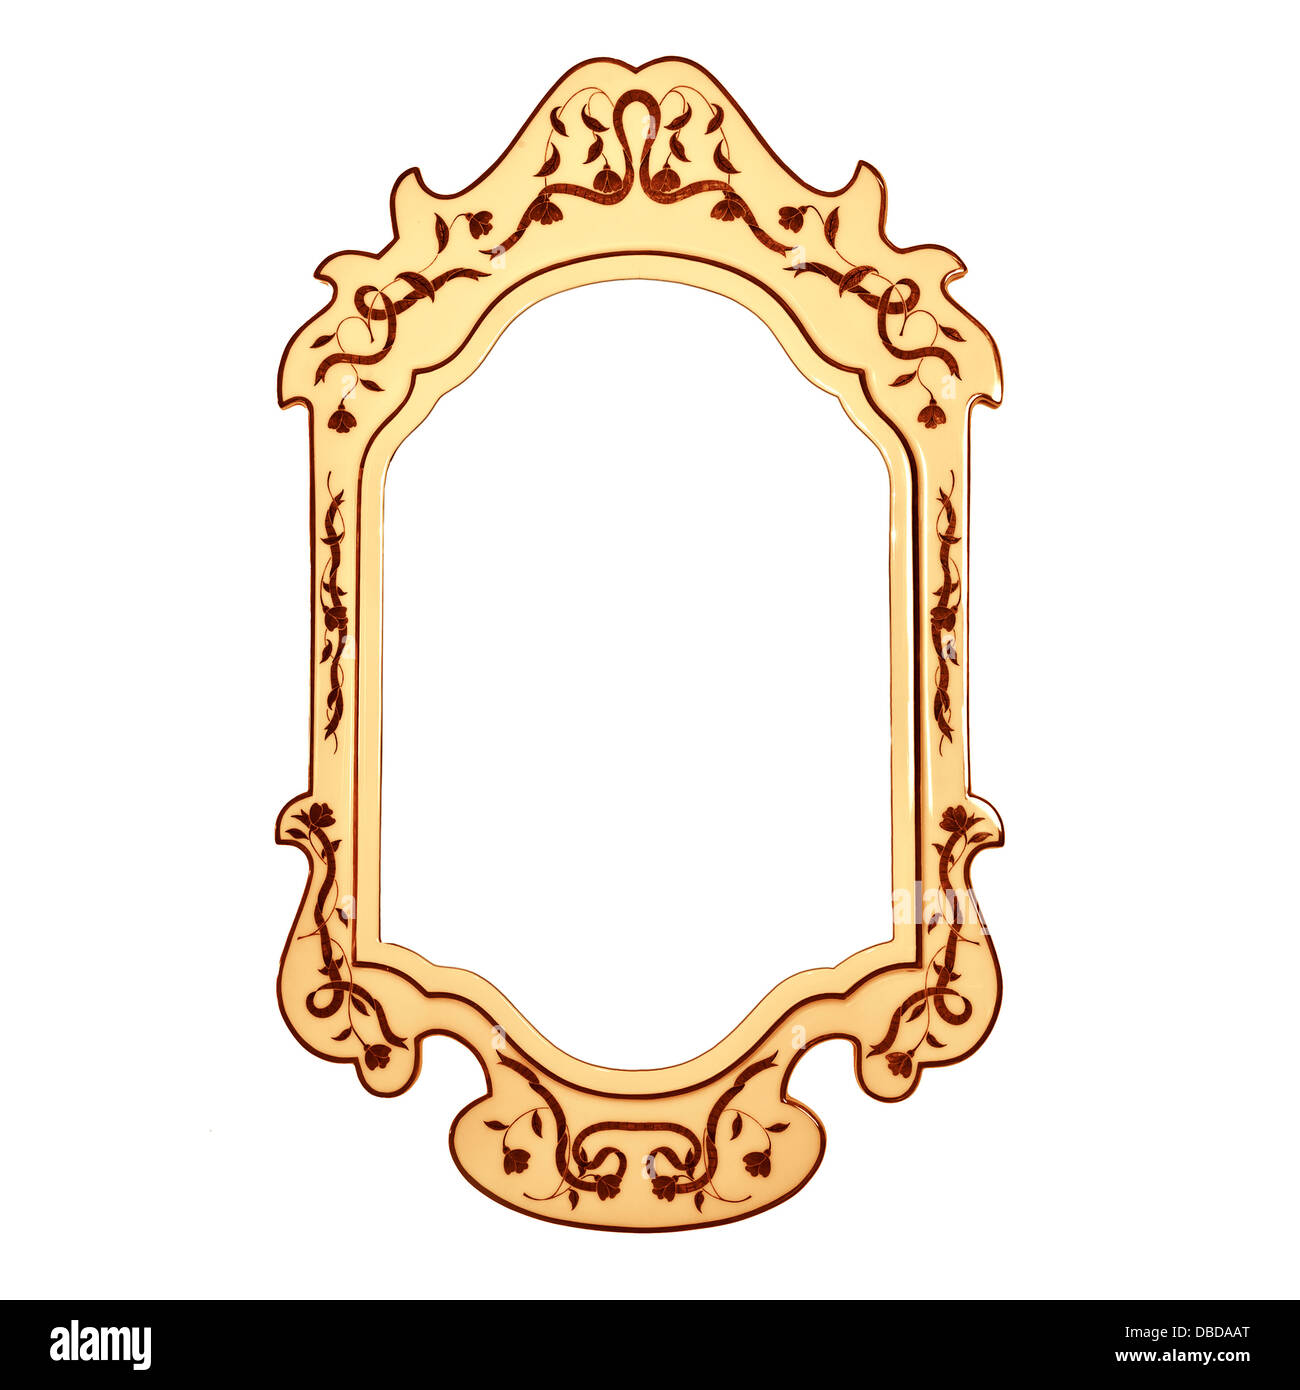 Empty vintage mirror frame isolated on white background, golden retro style framework, beautiful wooden carved frame Stock Photo